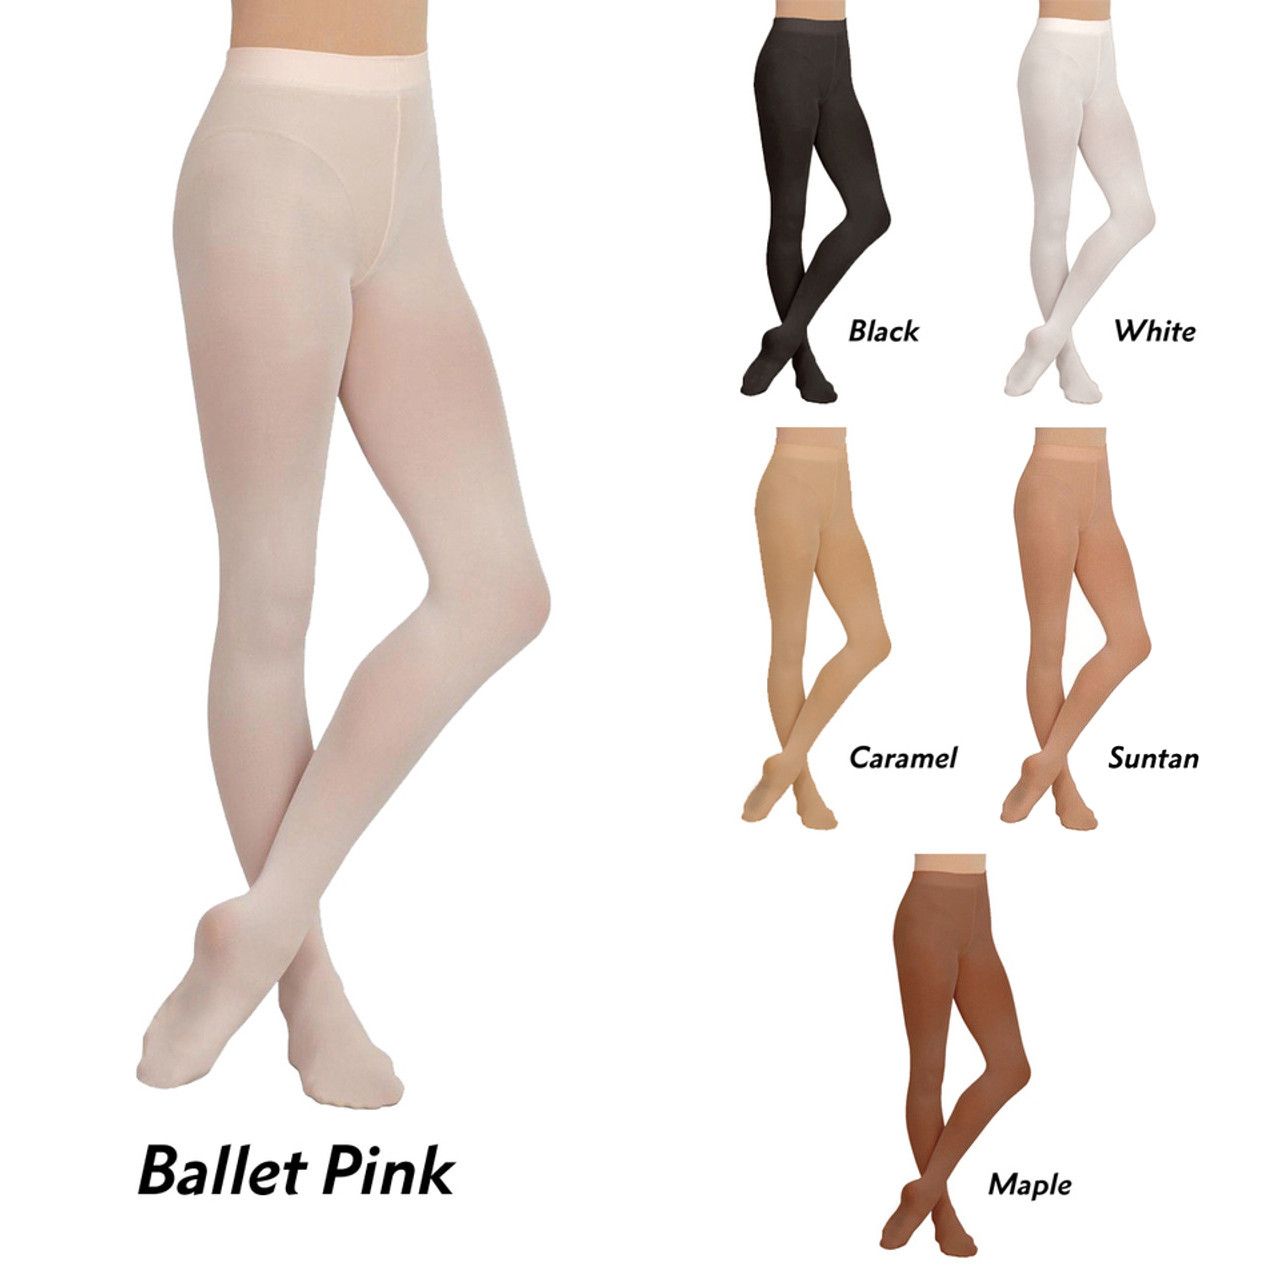 ADULT CAPEZIO ULTRA SOFT FOOTED TIGHTS - 1915